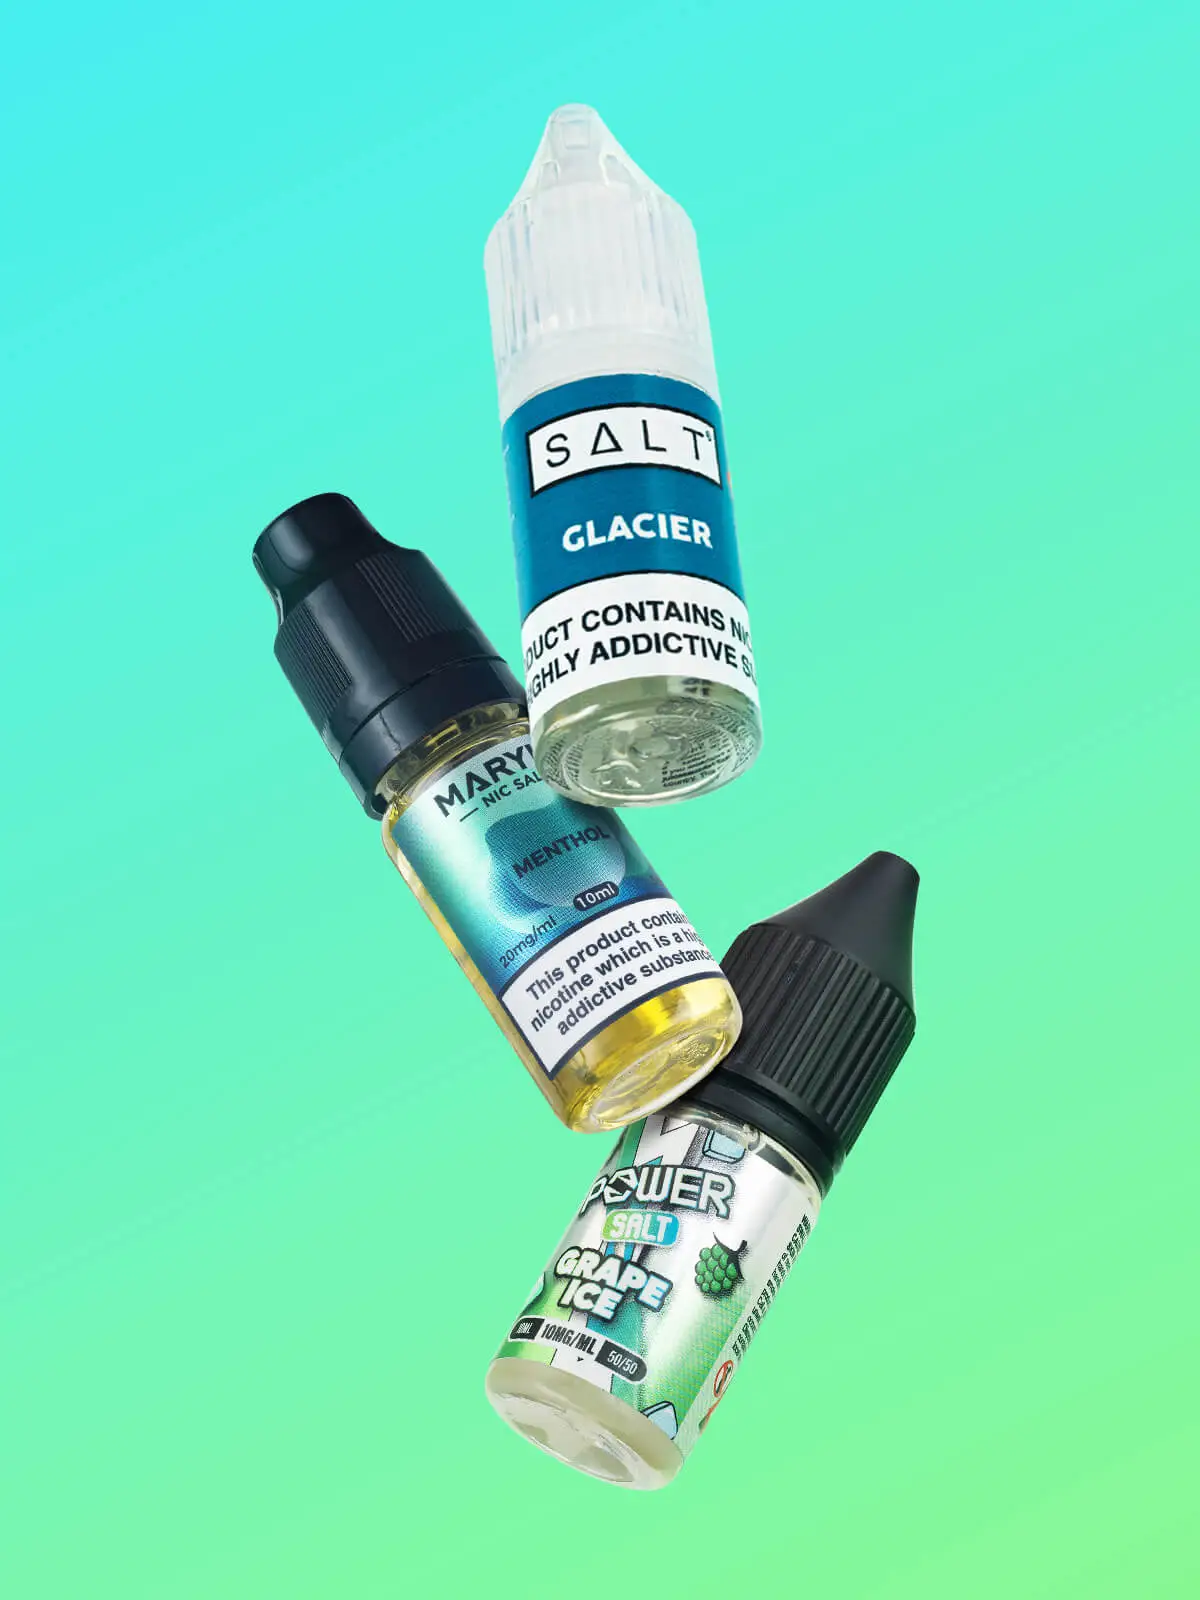 Floating bottles of e-liquid featuring SALT Glacier, Maryliq Menthol and Power Salt Grape Ice, in front of a green/blue background